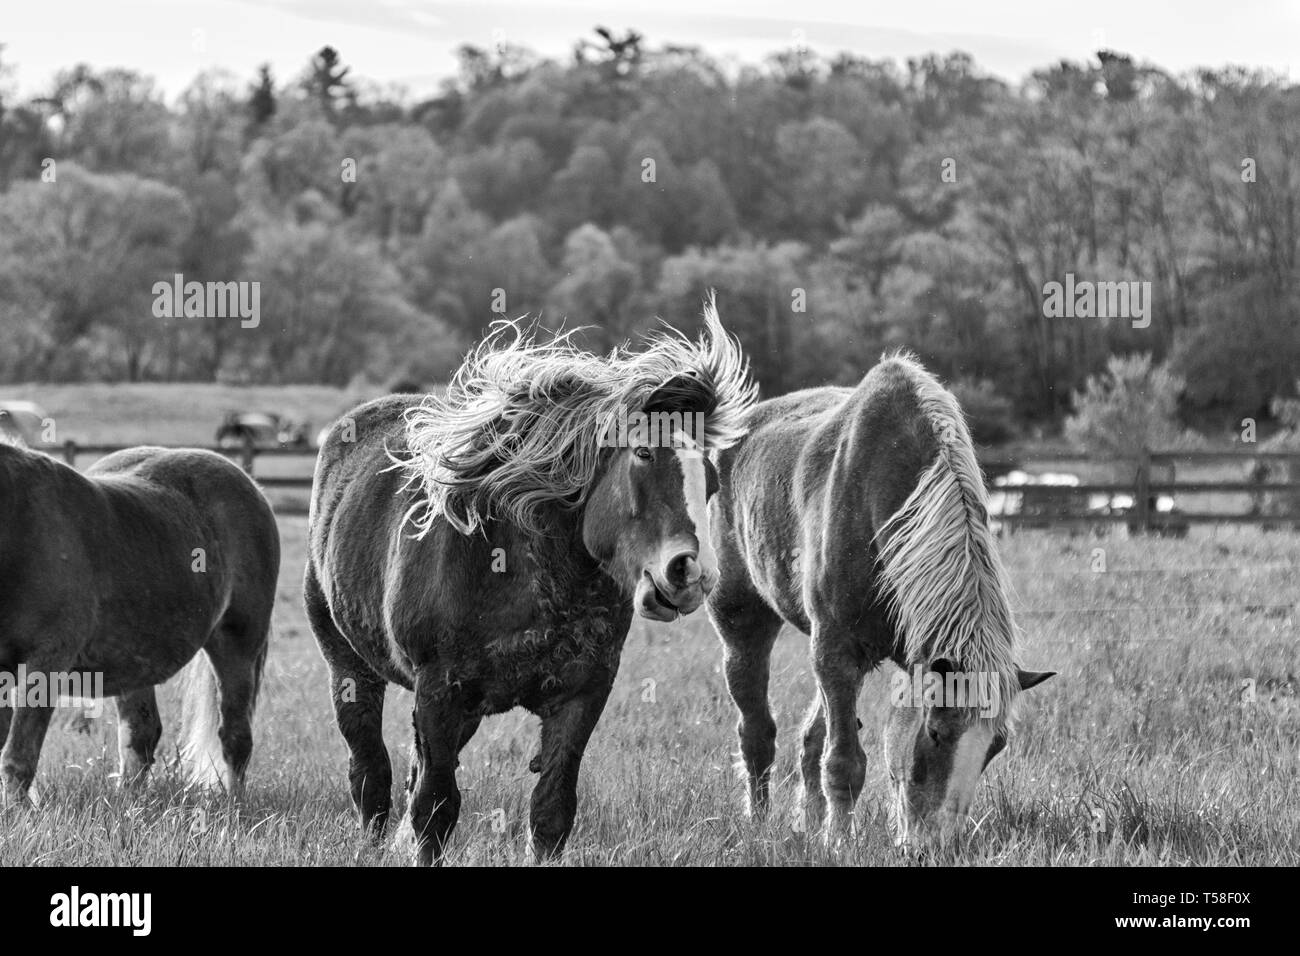 A Belgian draft horse (Equus Feus caballus) has its mane tossled by the wind Stock Photo